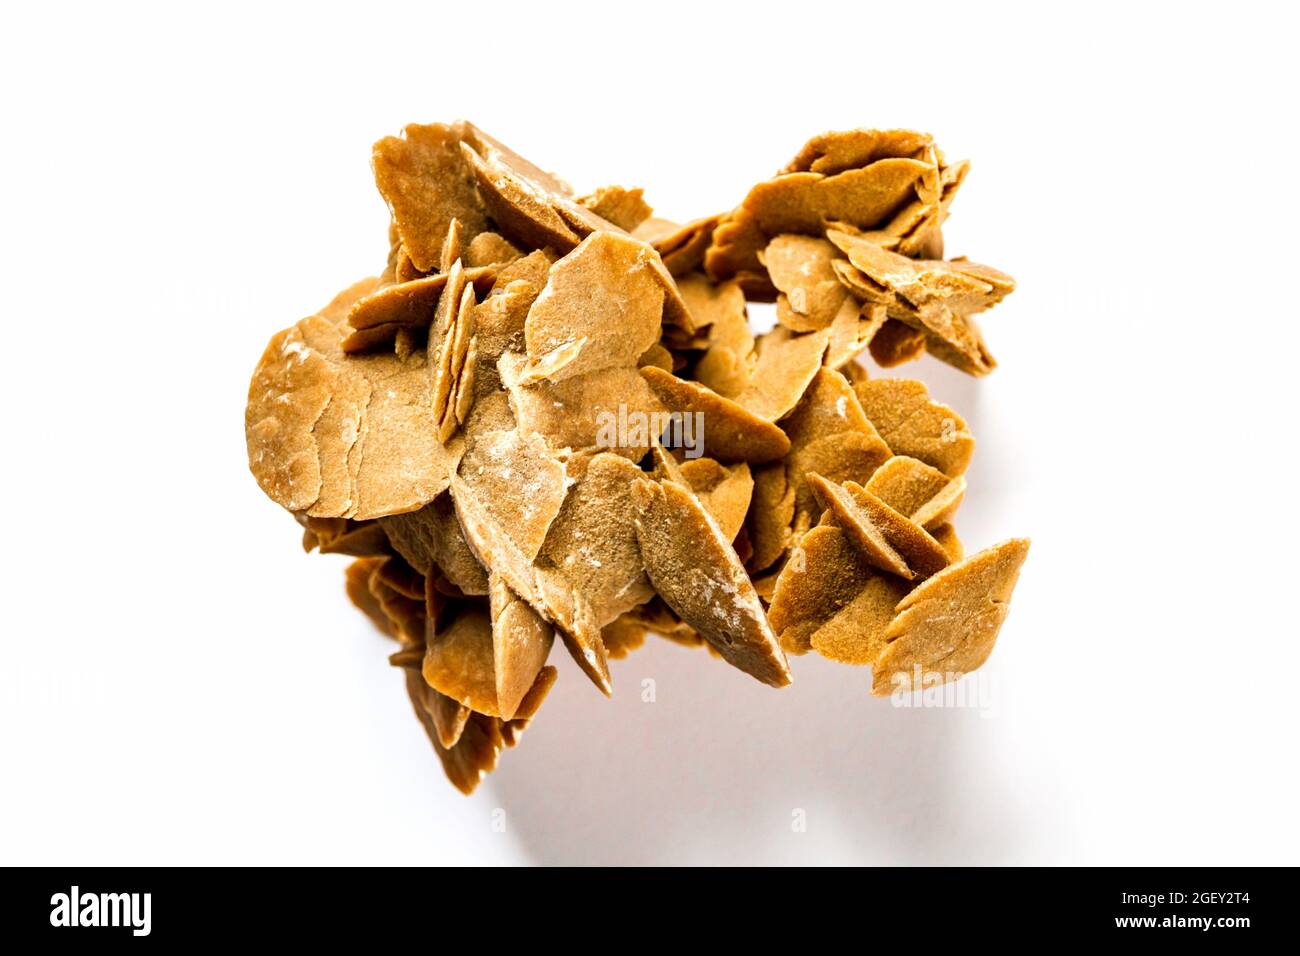 Desert rose crystal isolated on white background. Closeup view Stock Photo